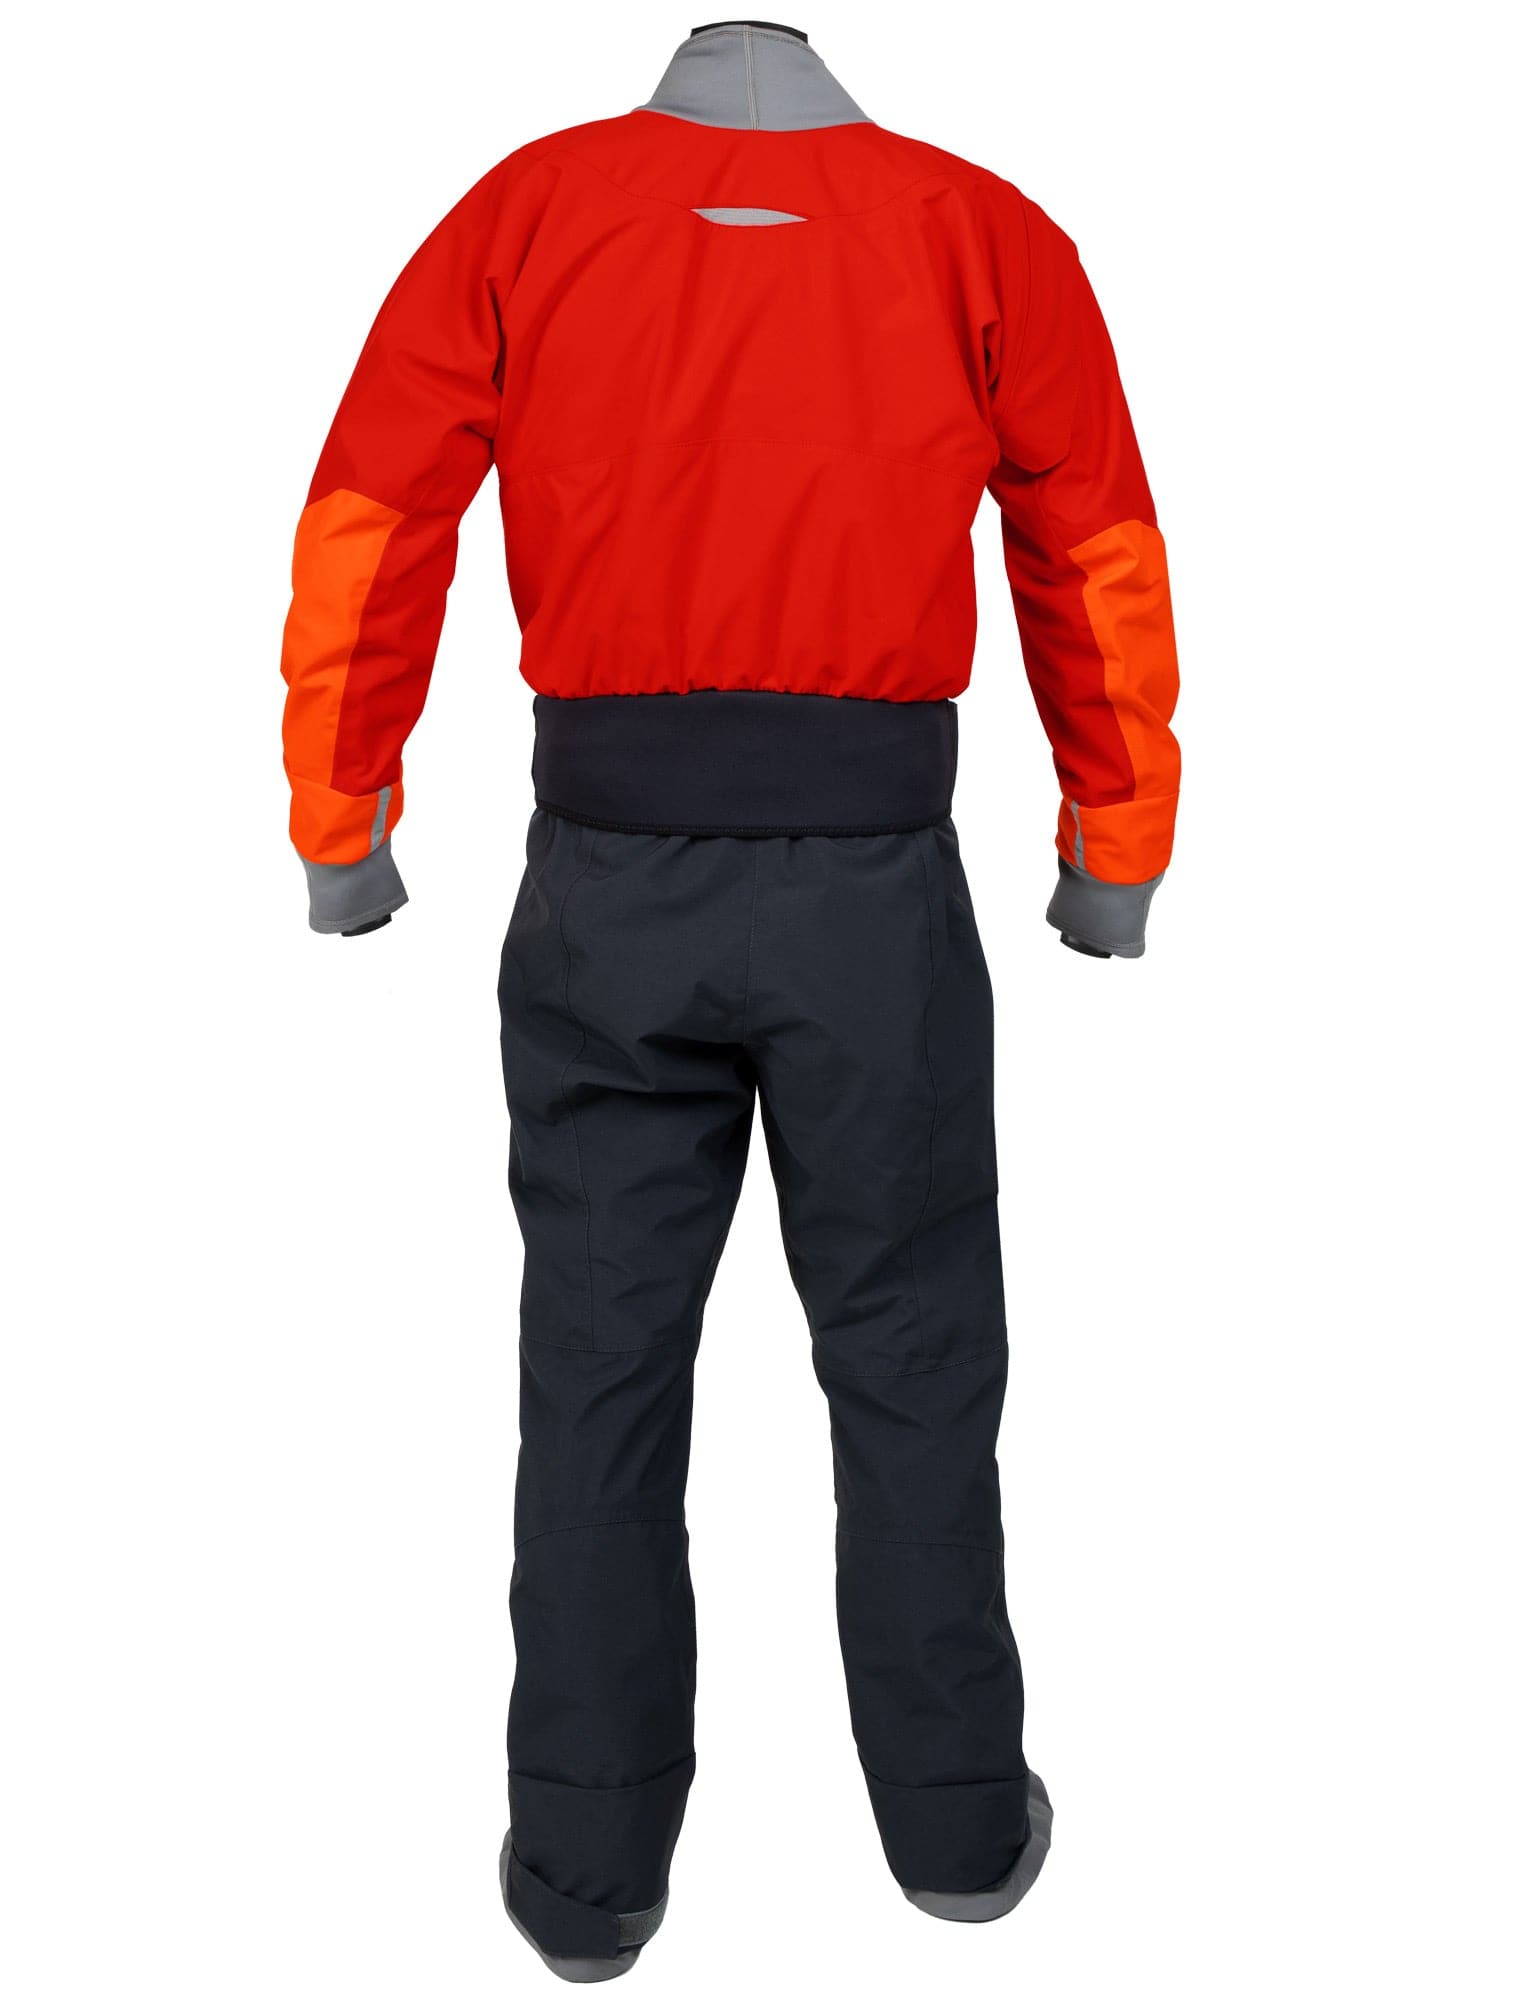 Featuring the Meridian (GORE-TEX Pro) Drysuit men's dry wear manufactured by Kokatat shown here from a sixth angle.